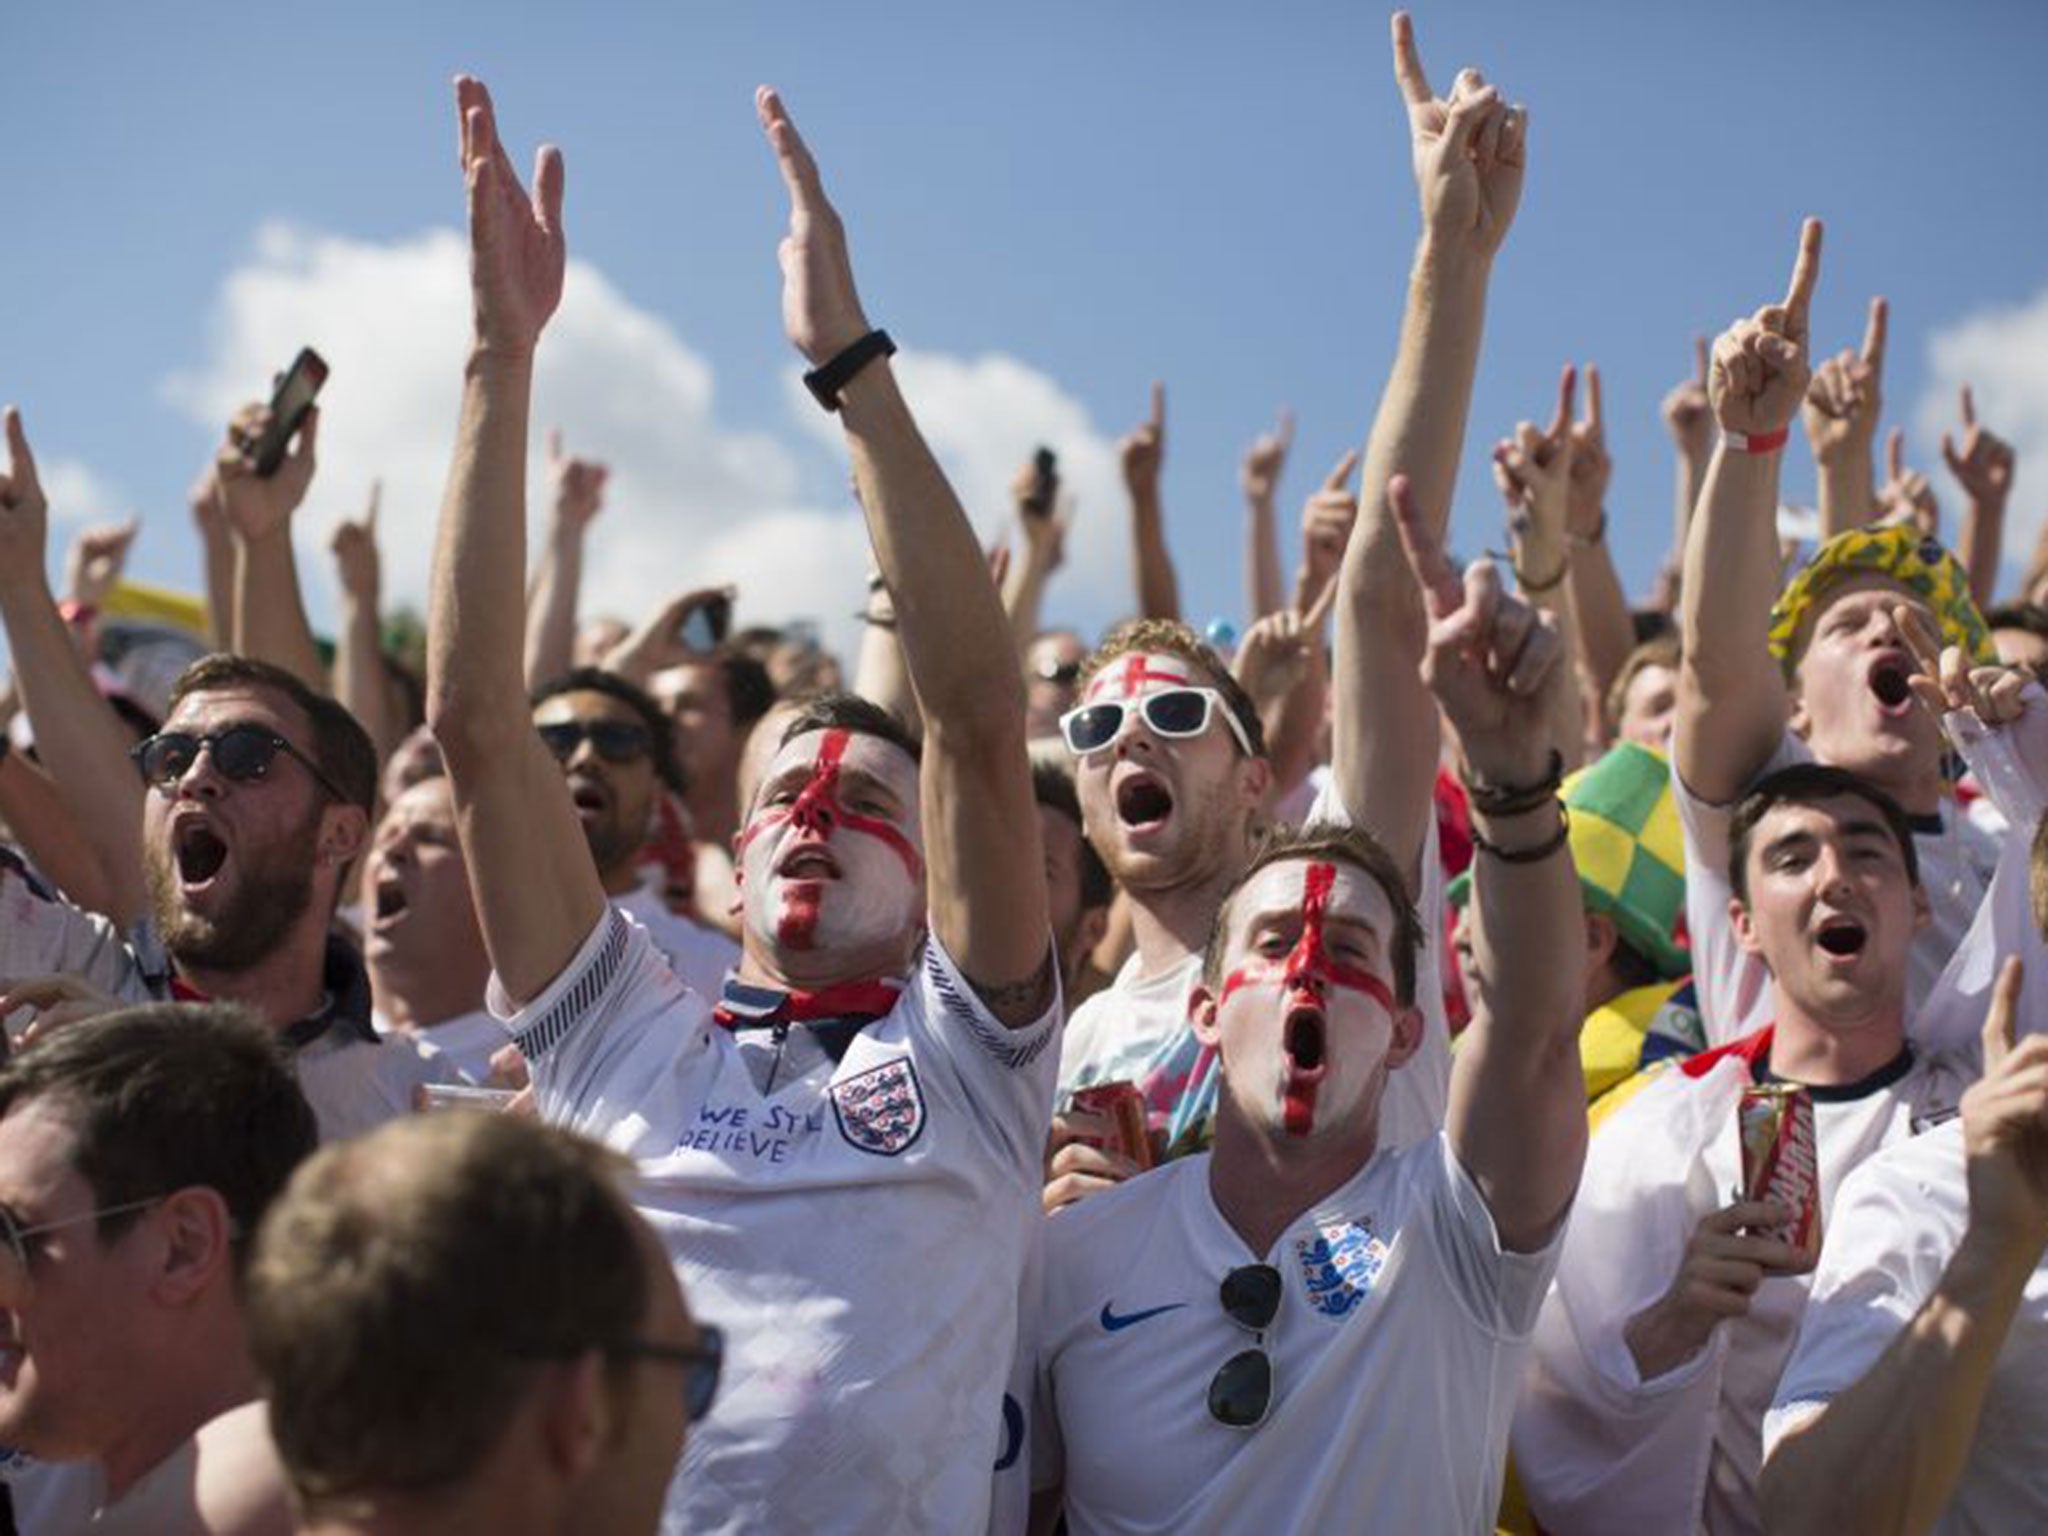 England fans remain in good spirits, even after a terminal 0-0 draw against Costa Rica